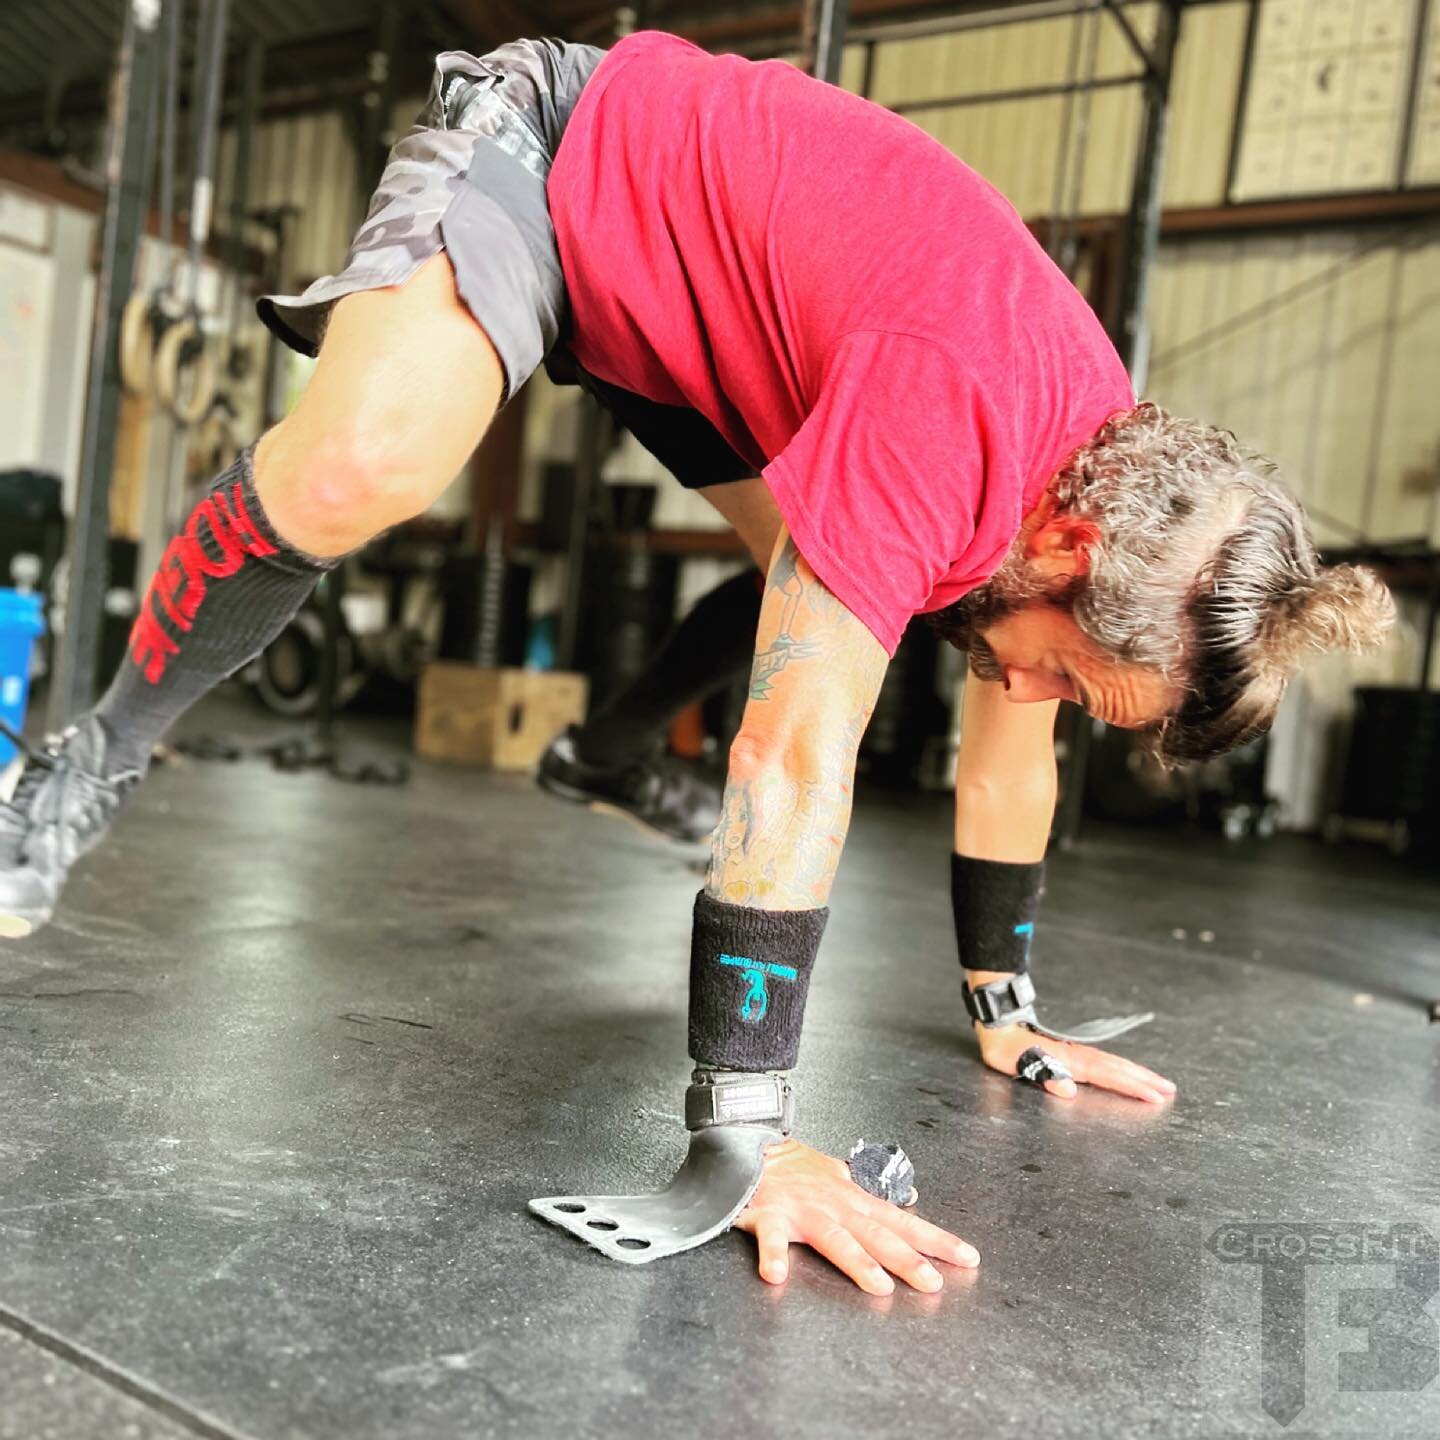 Burpees don't always get the love they deserve, but at CrossFit TFB, we know they're a great way to boost your heart rate and build strength. 💪🔥 Our members are no strangers to this challenging movement, and we love seeing them crush their workouts